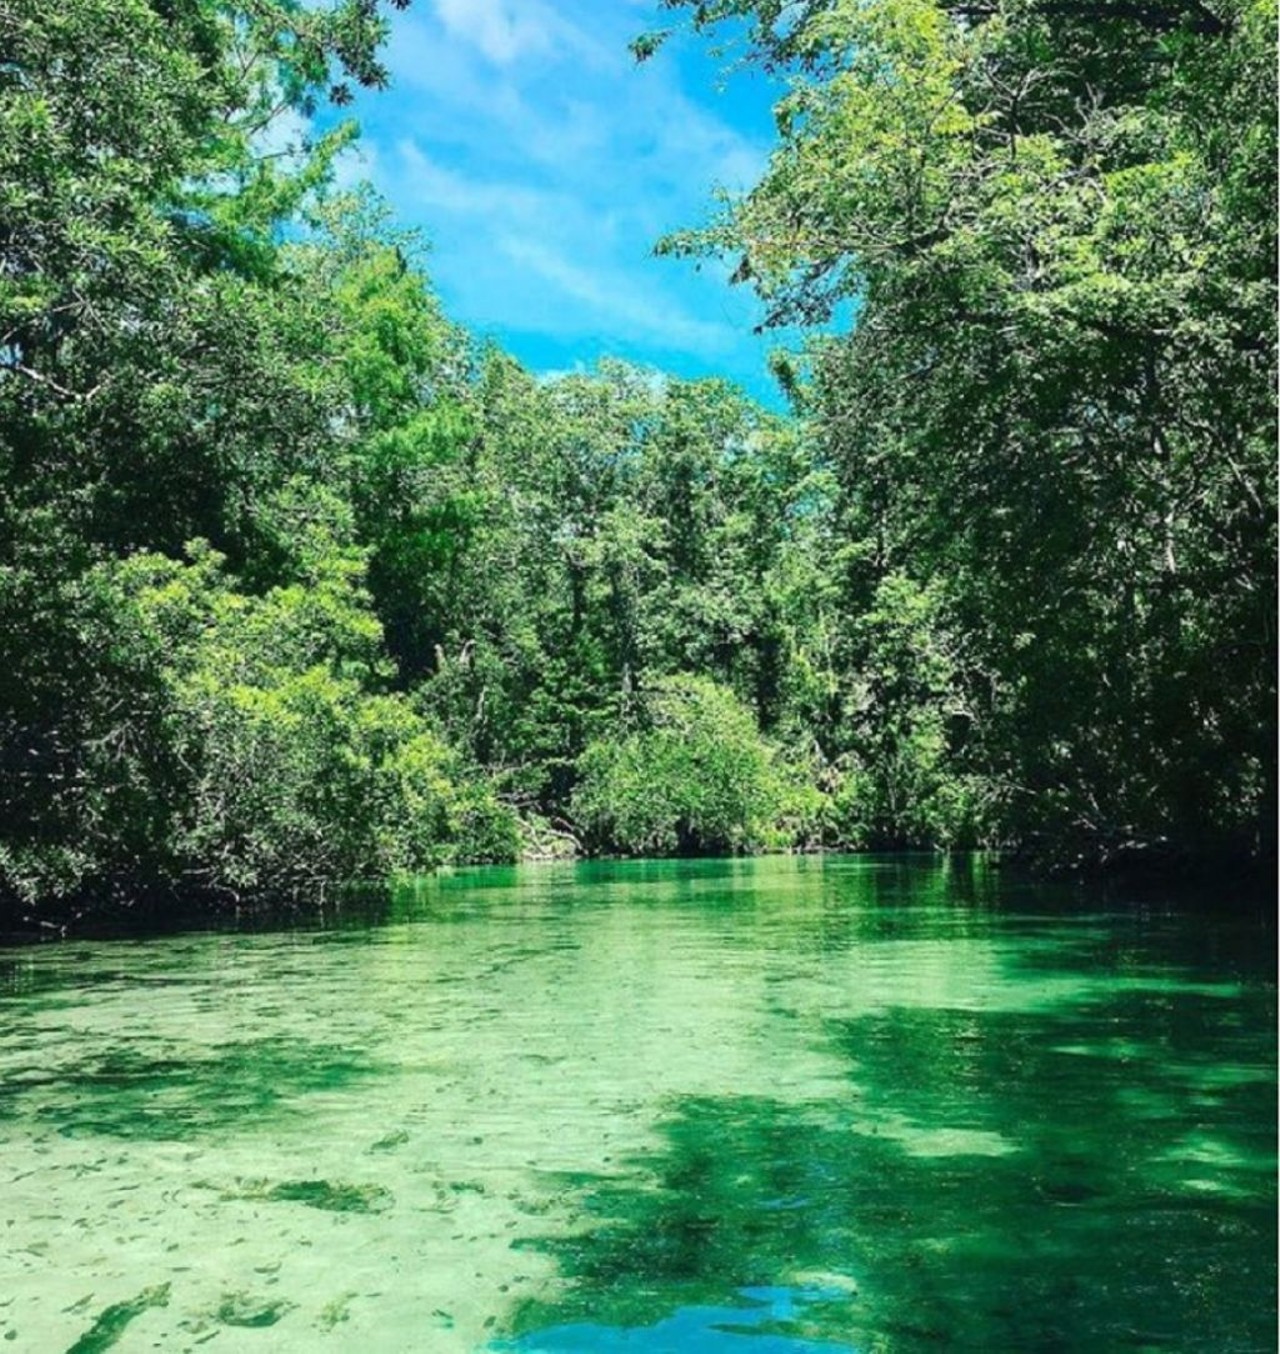 Weeki Wachee Springs State Park 
6131 Commercial Way, Spring Hill
With the return of the Weeki Wachi mermaids, guests can choose to relax by watching their splendid tricks, or take a tranquil kayak trip down the spring.
Photo via Florida State Parks/Instagram